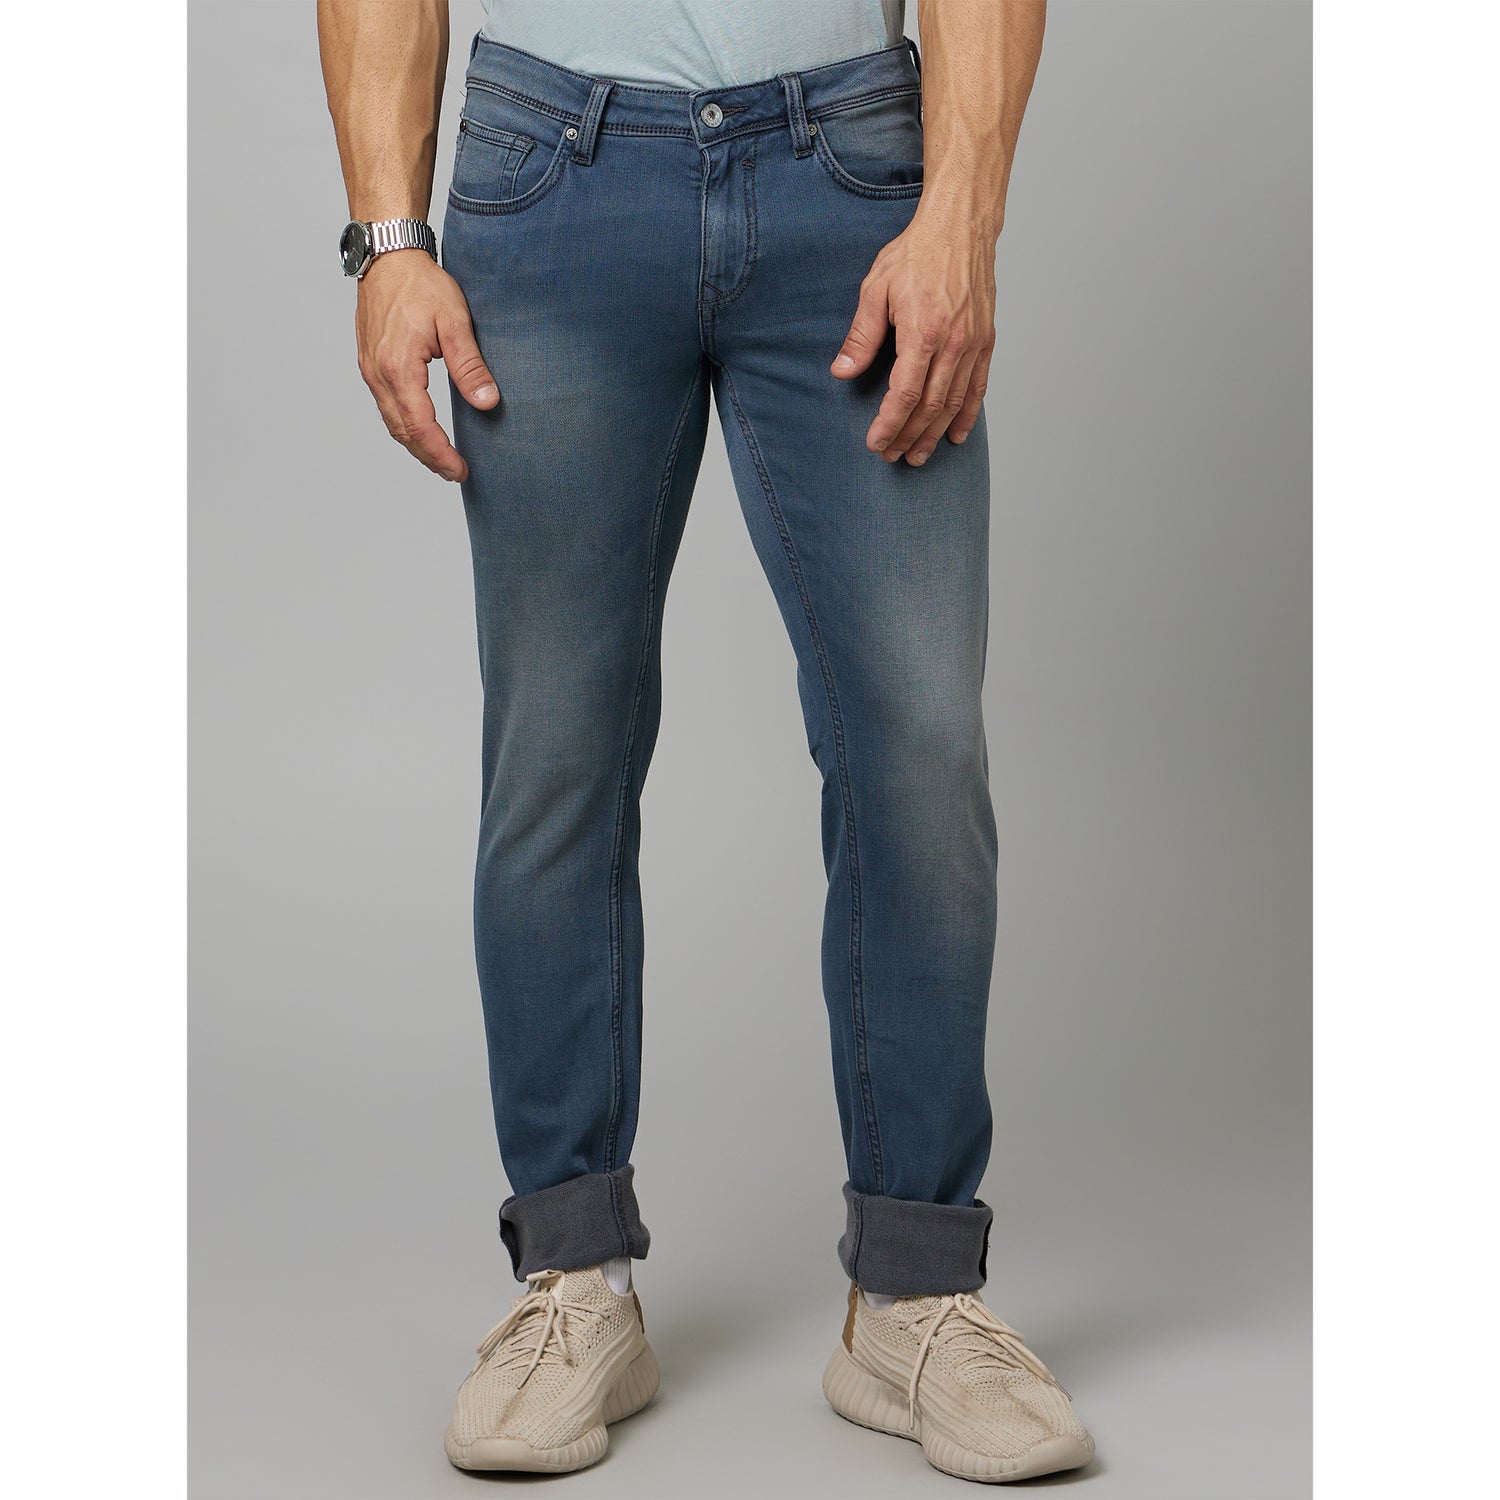 Blue Mid-Rise Jean Fit Clean Look Light Fade Jeans (DOOVER45)